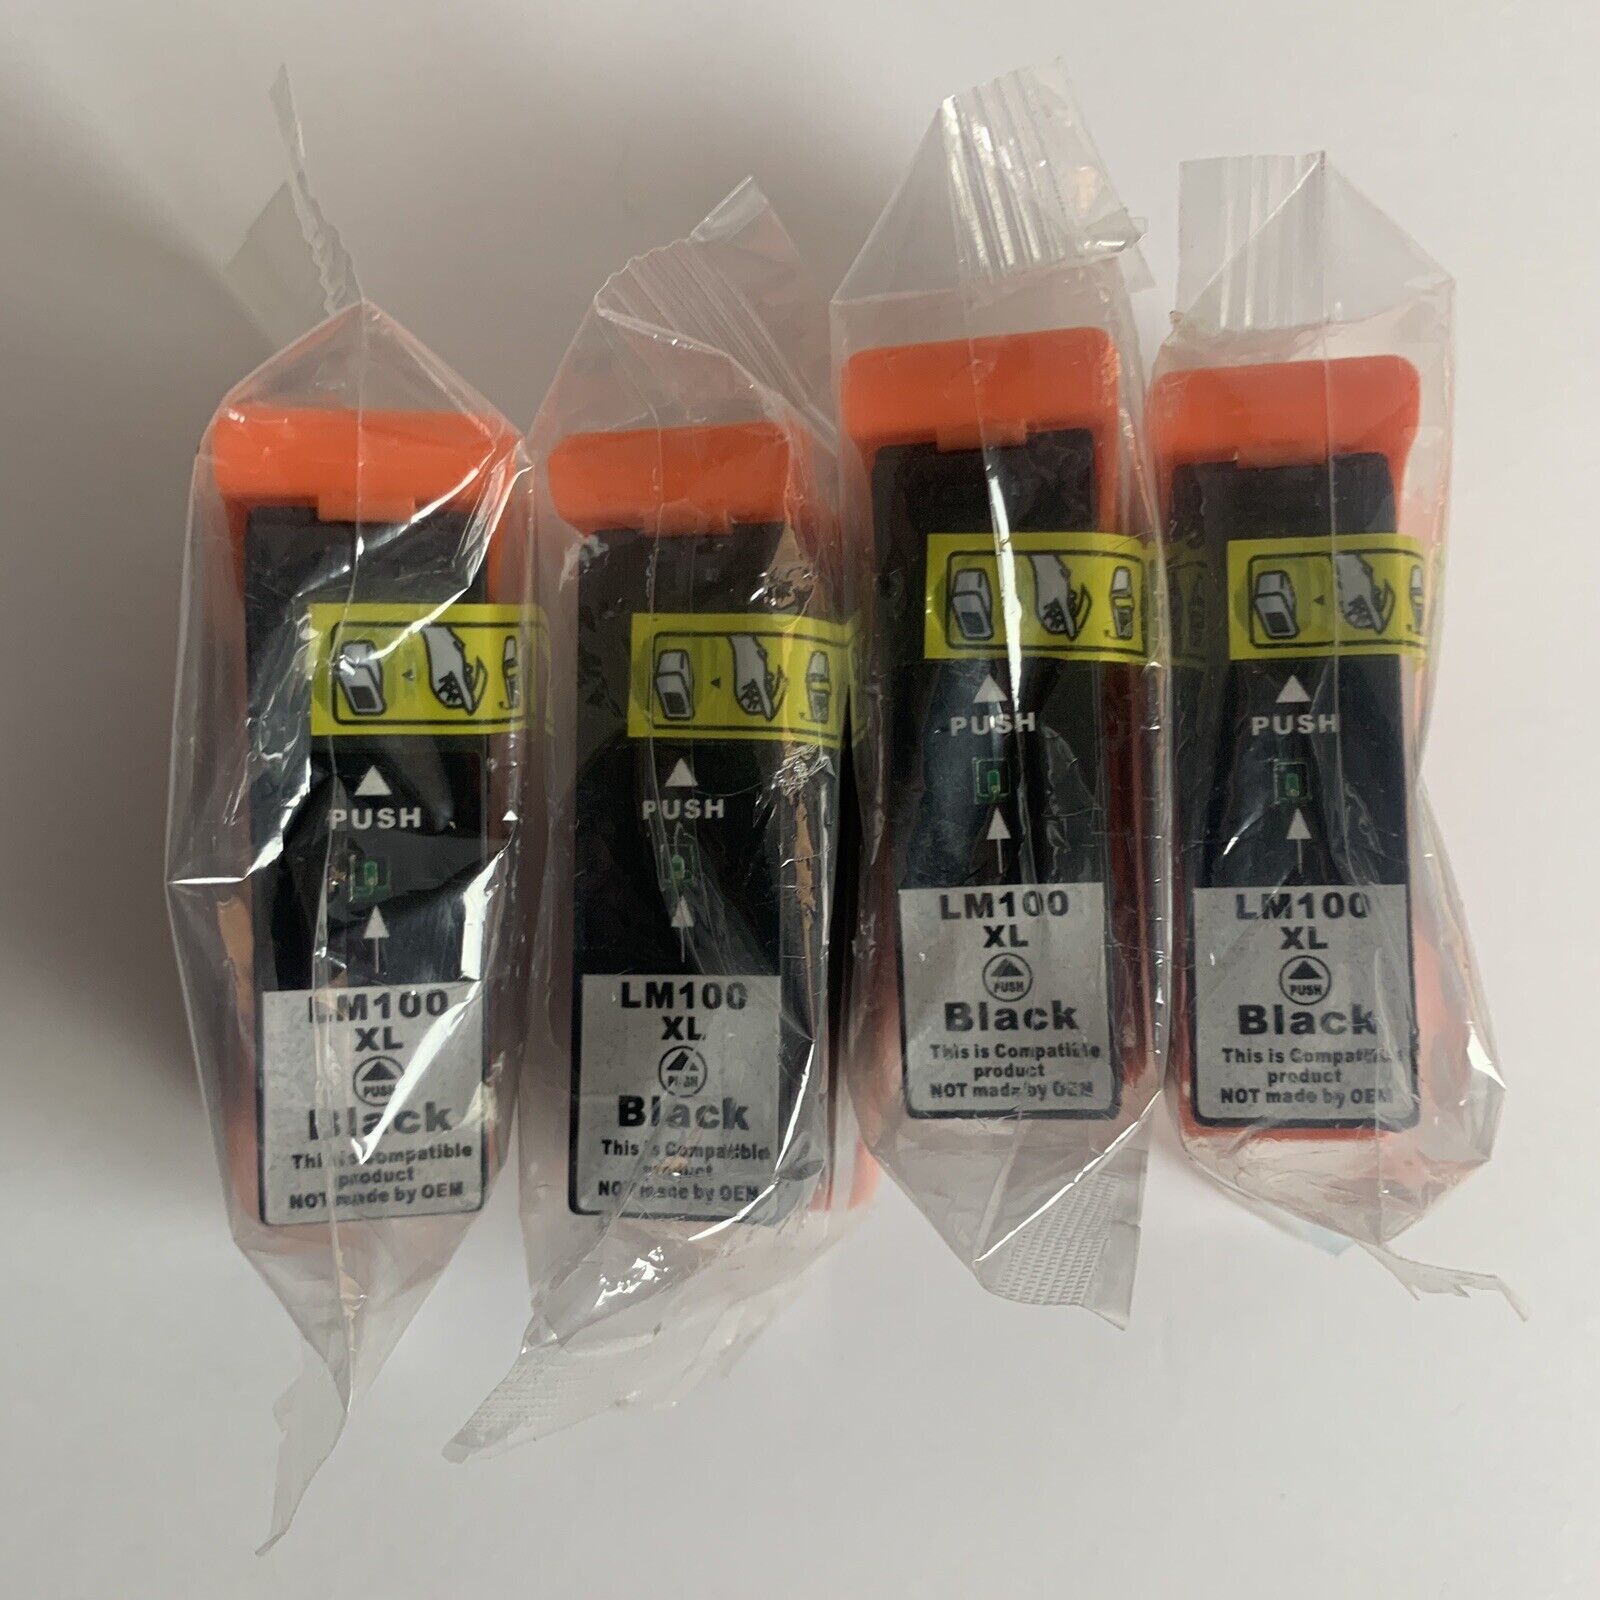 Brand New Ink Cartridge LM100 XL Color Black  Lot of 4